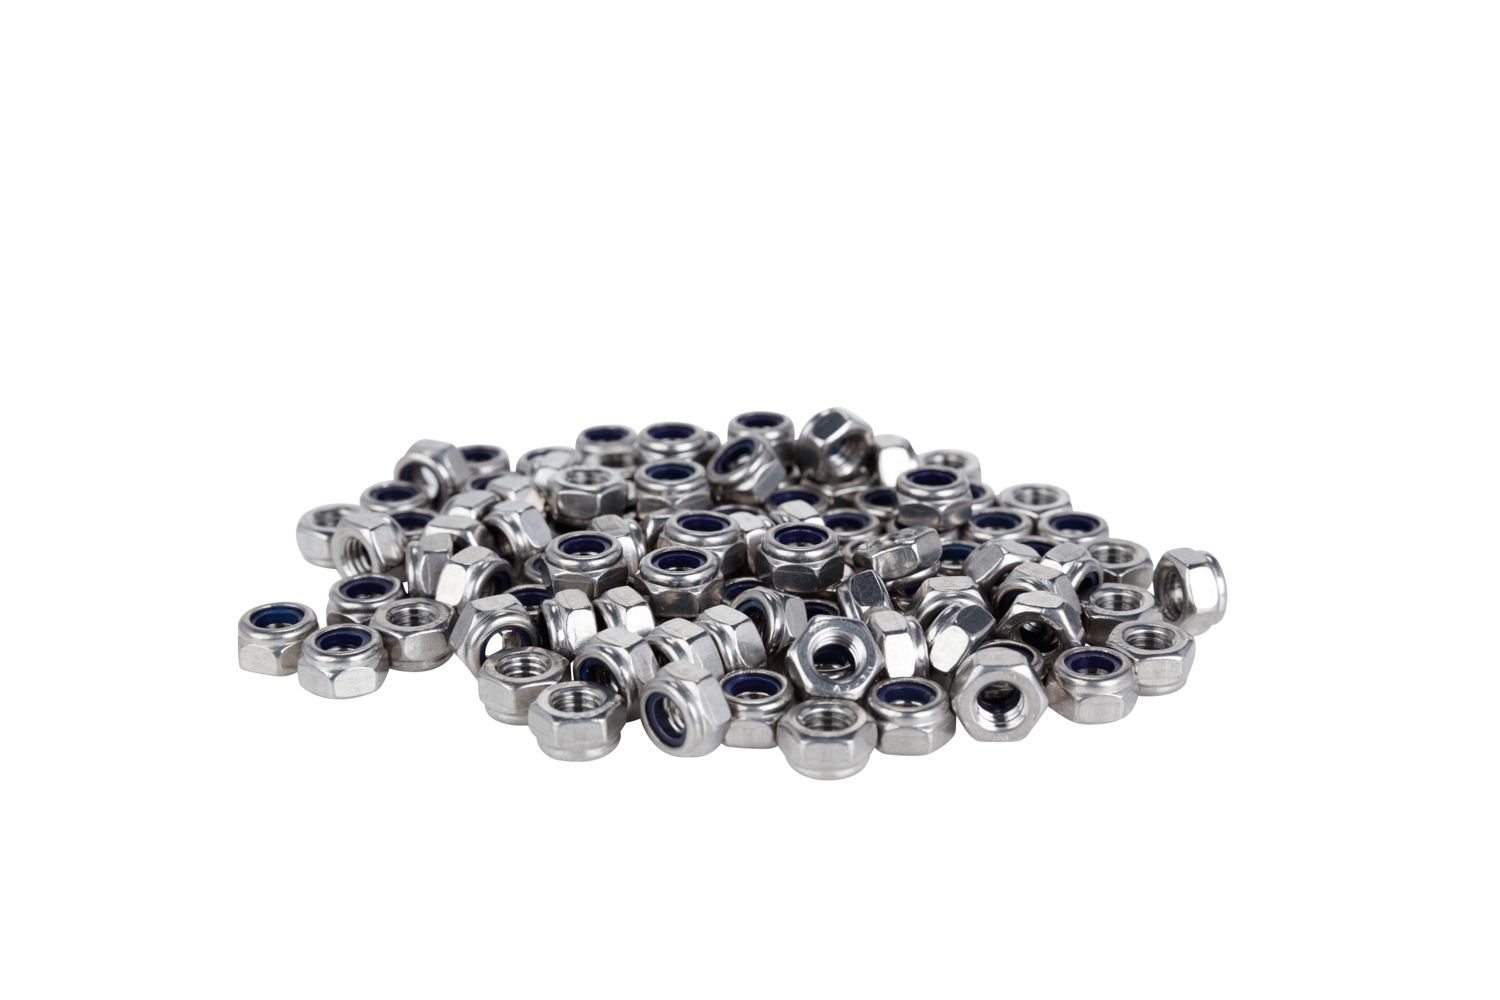 one hundred stainless steel nyloc nuts